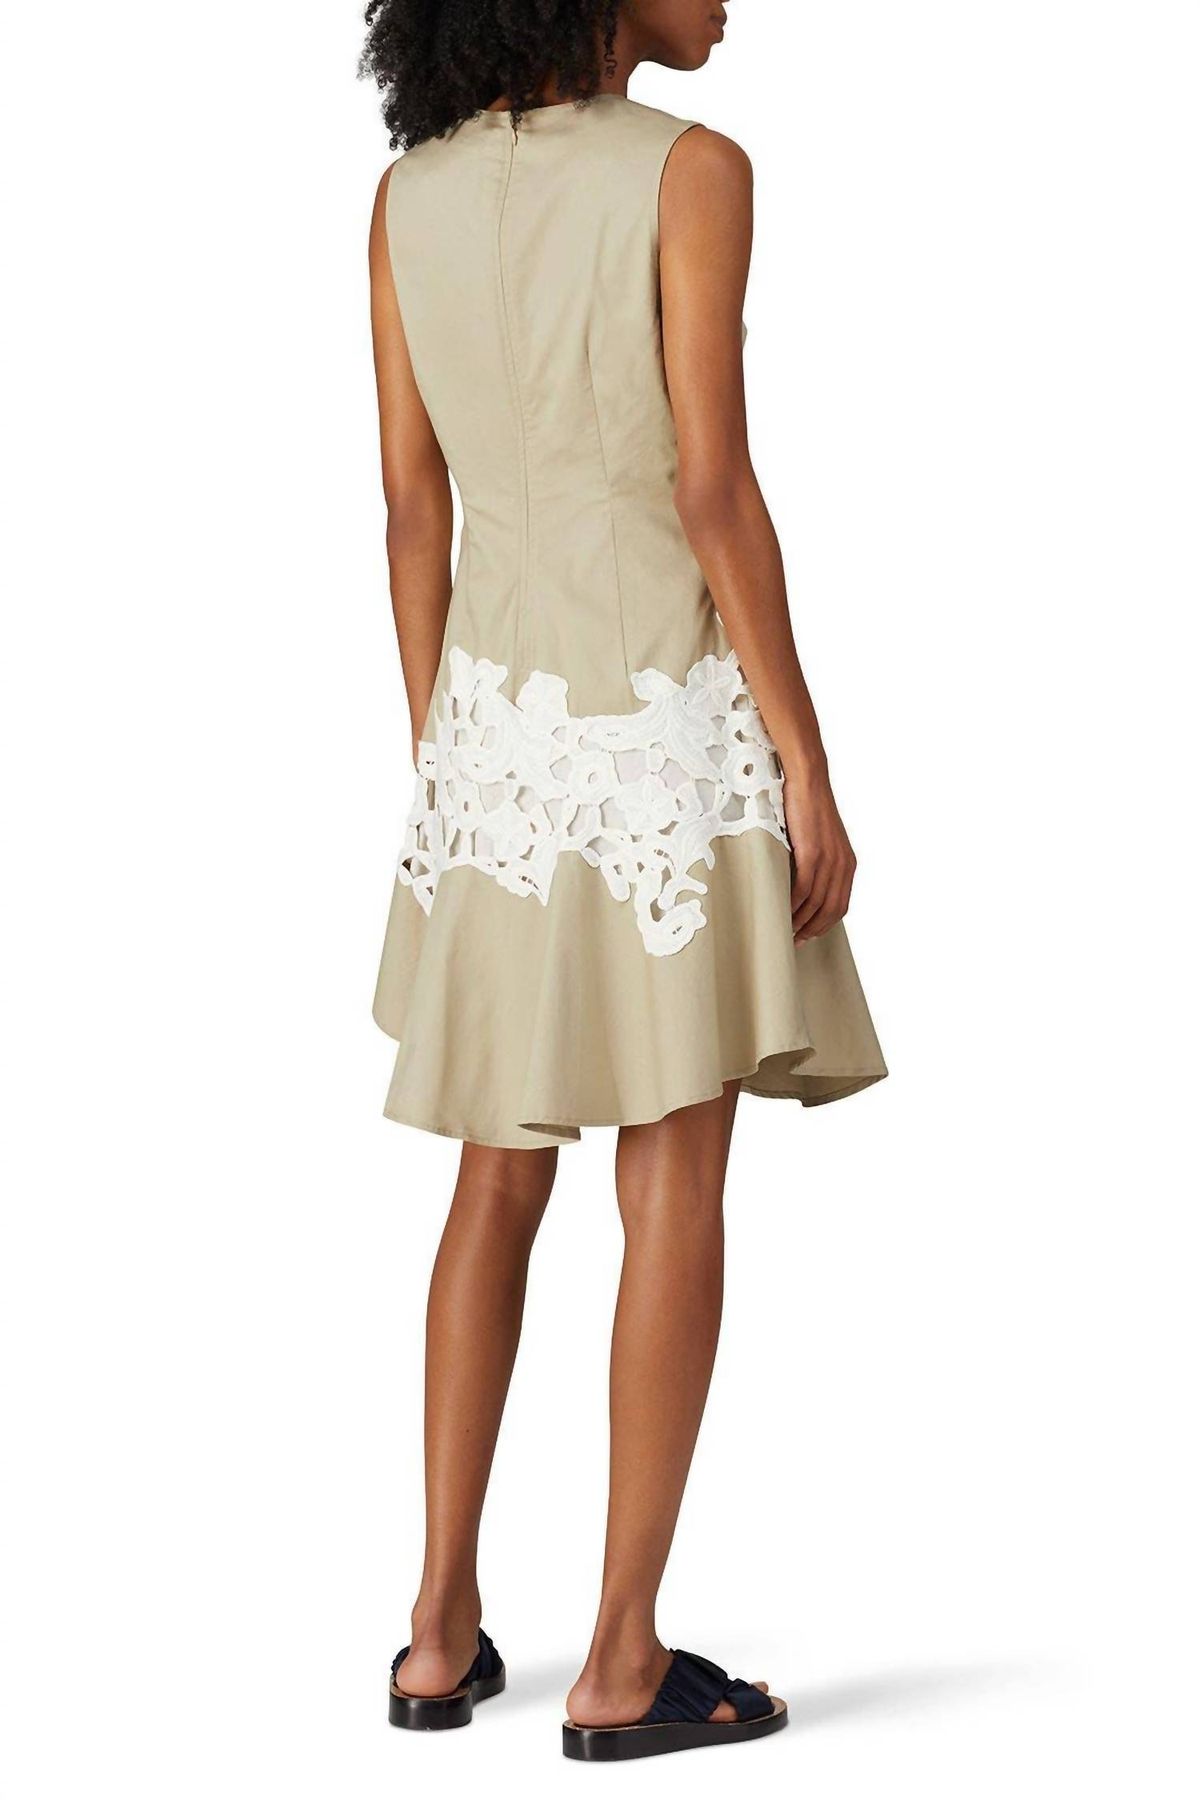 Style 1-3036452524-1231-1 Derek Lam 10 Crosby Plus Size 36 Lace Nude Cocktail Dress on Queenly